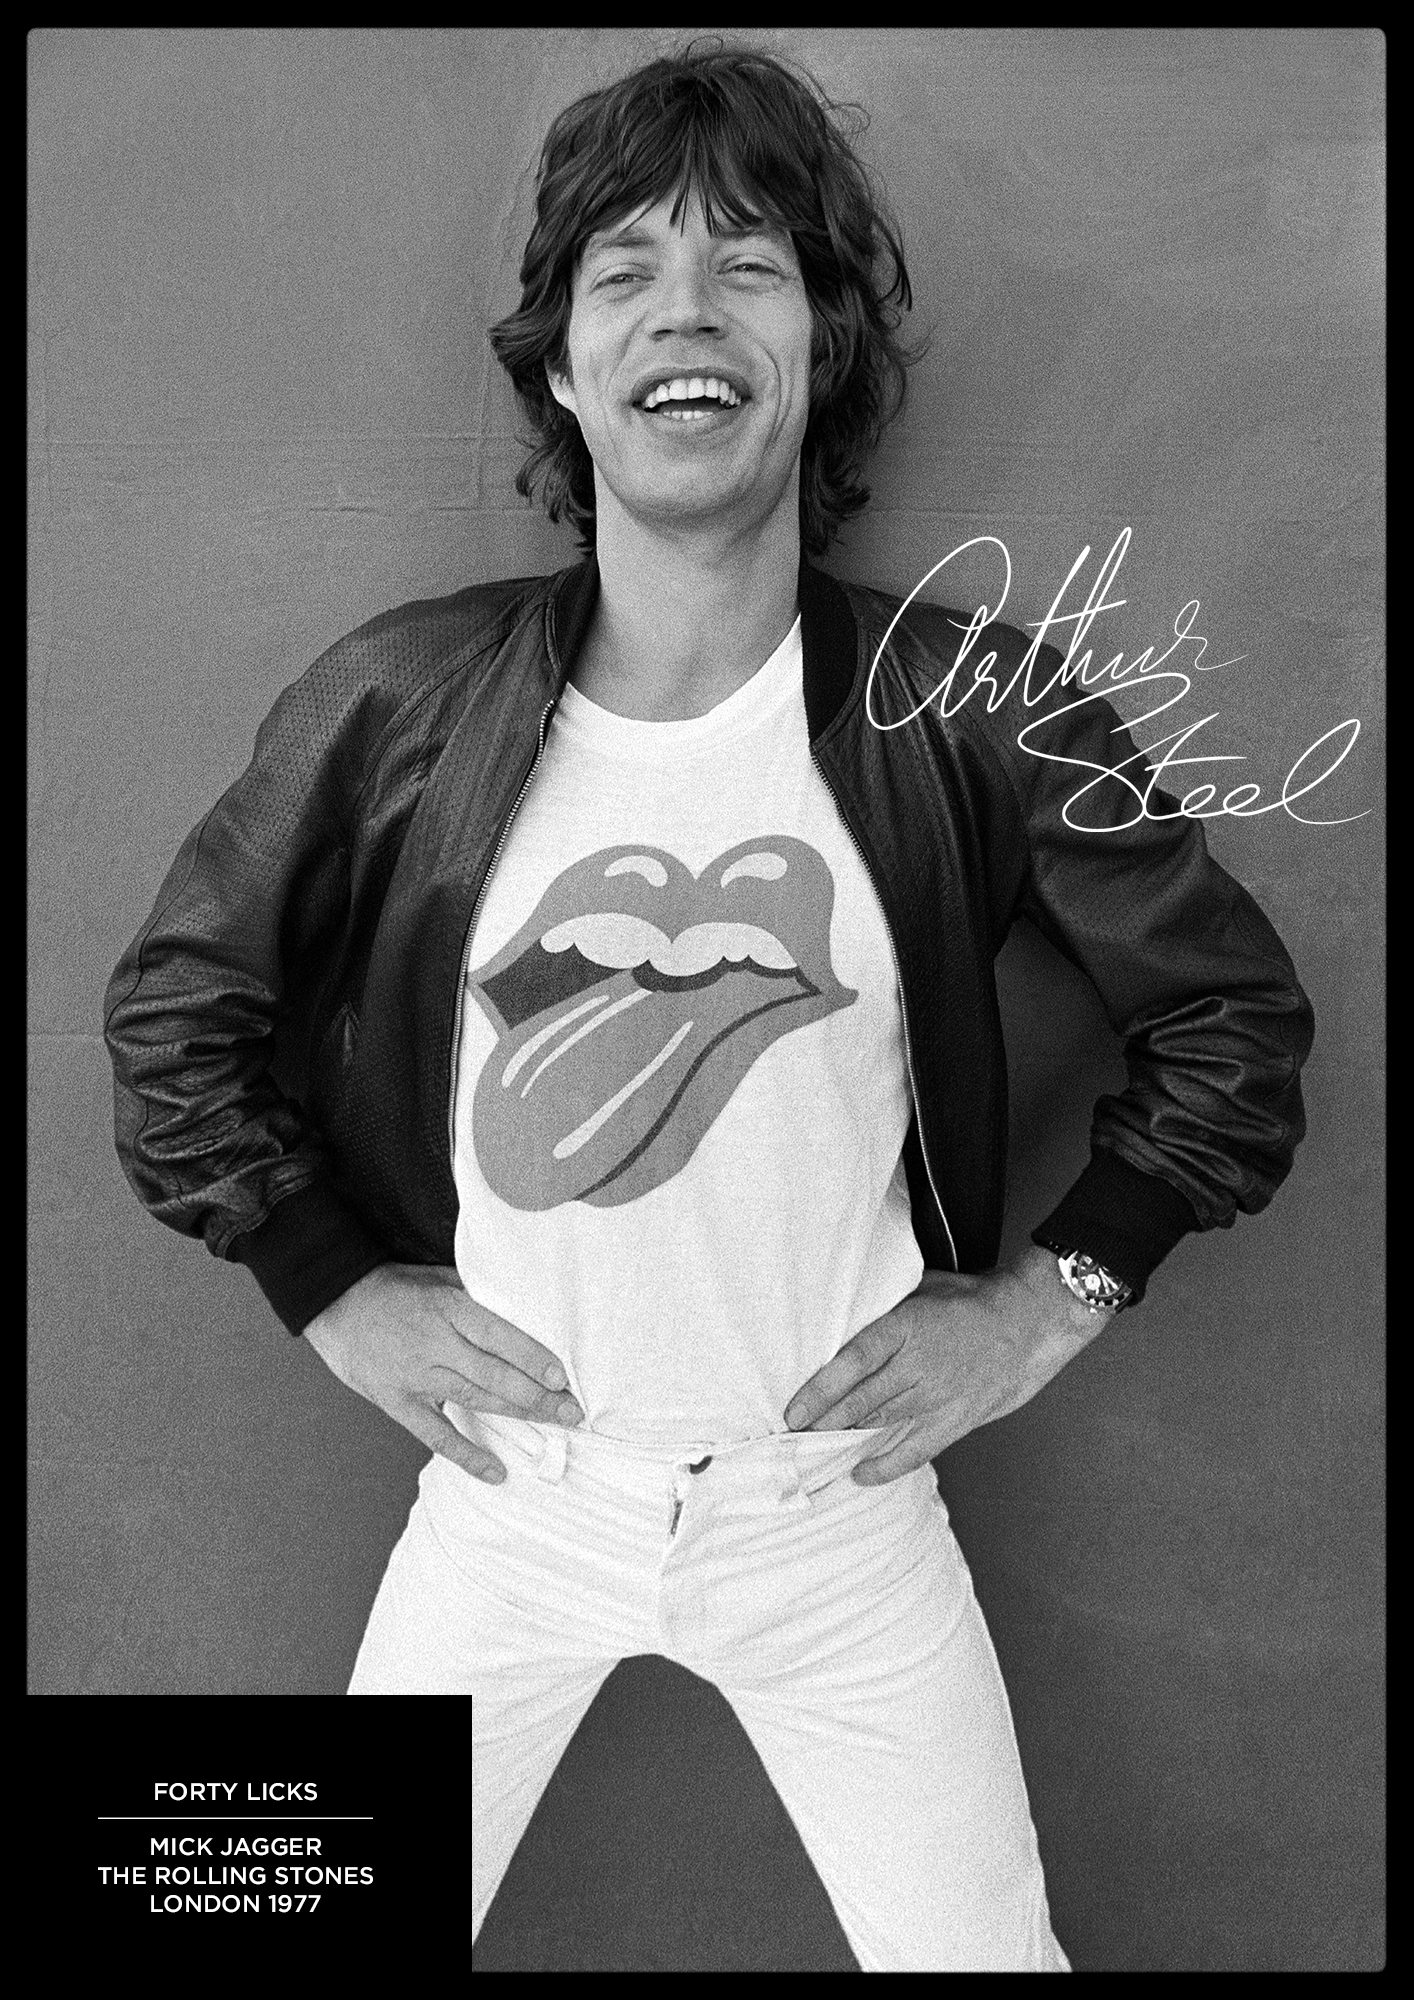 rare black and white photograph mick jagger forty licks the rolling stones